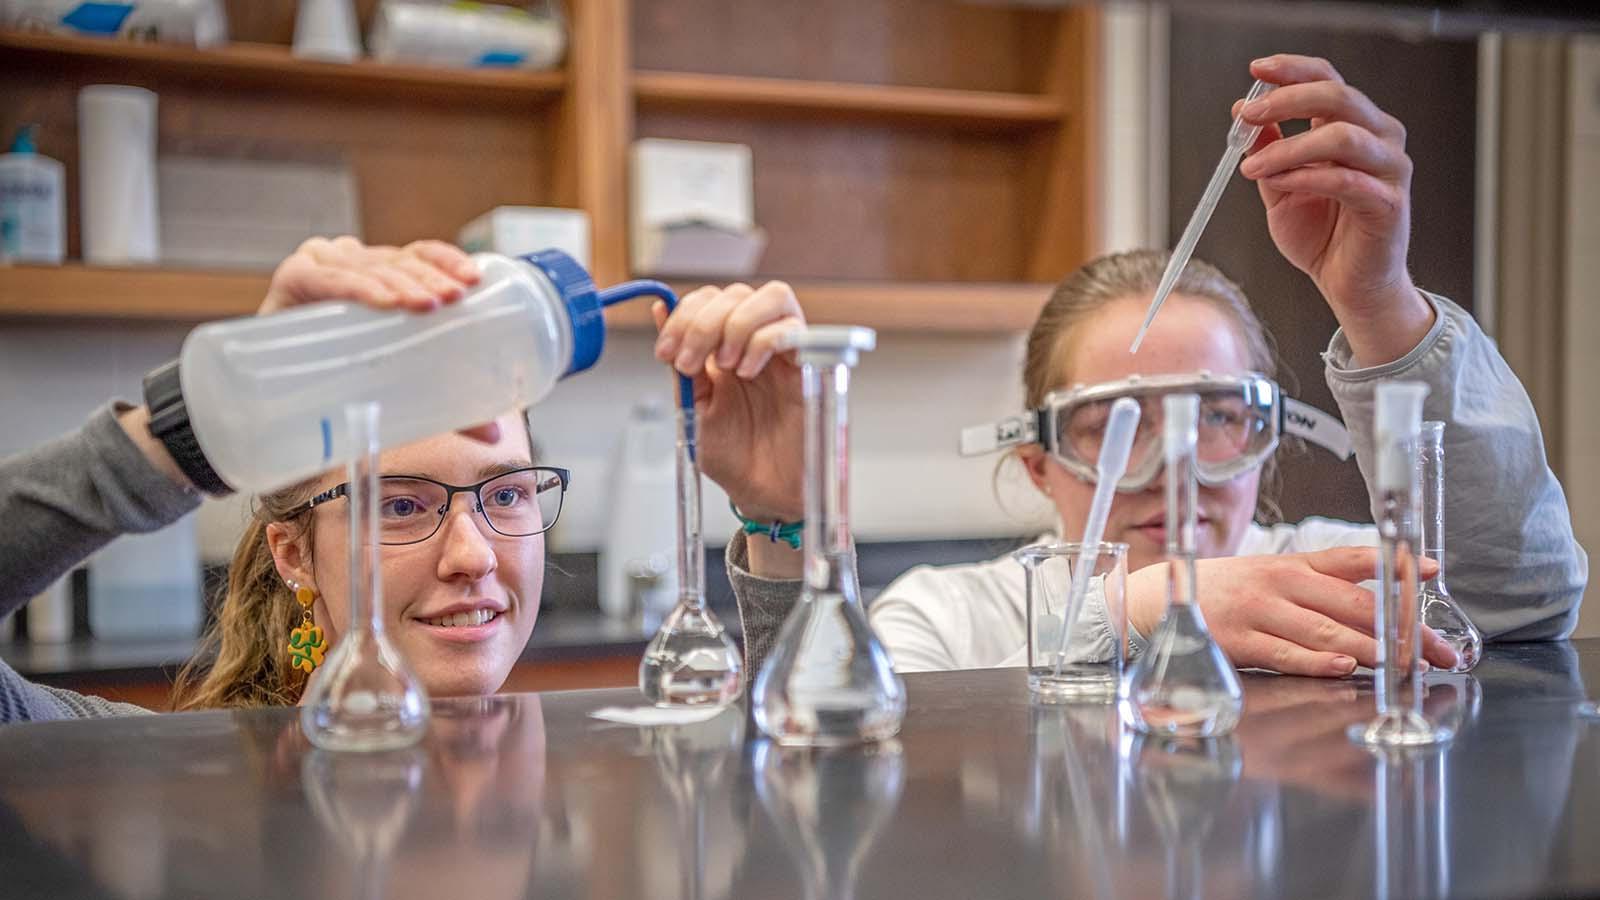 Two SURVE students adding solutions into beakers